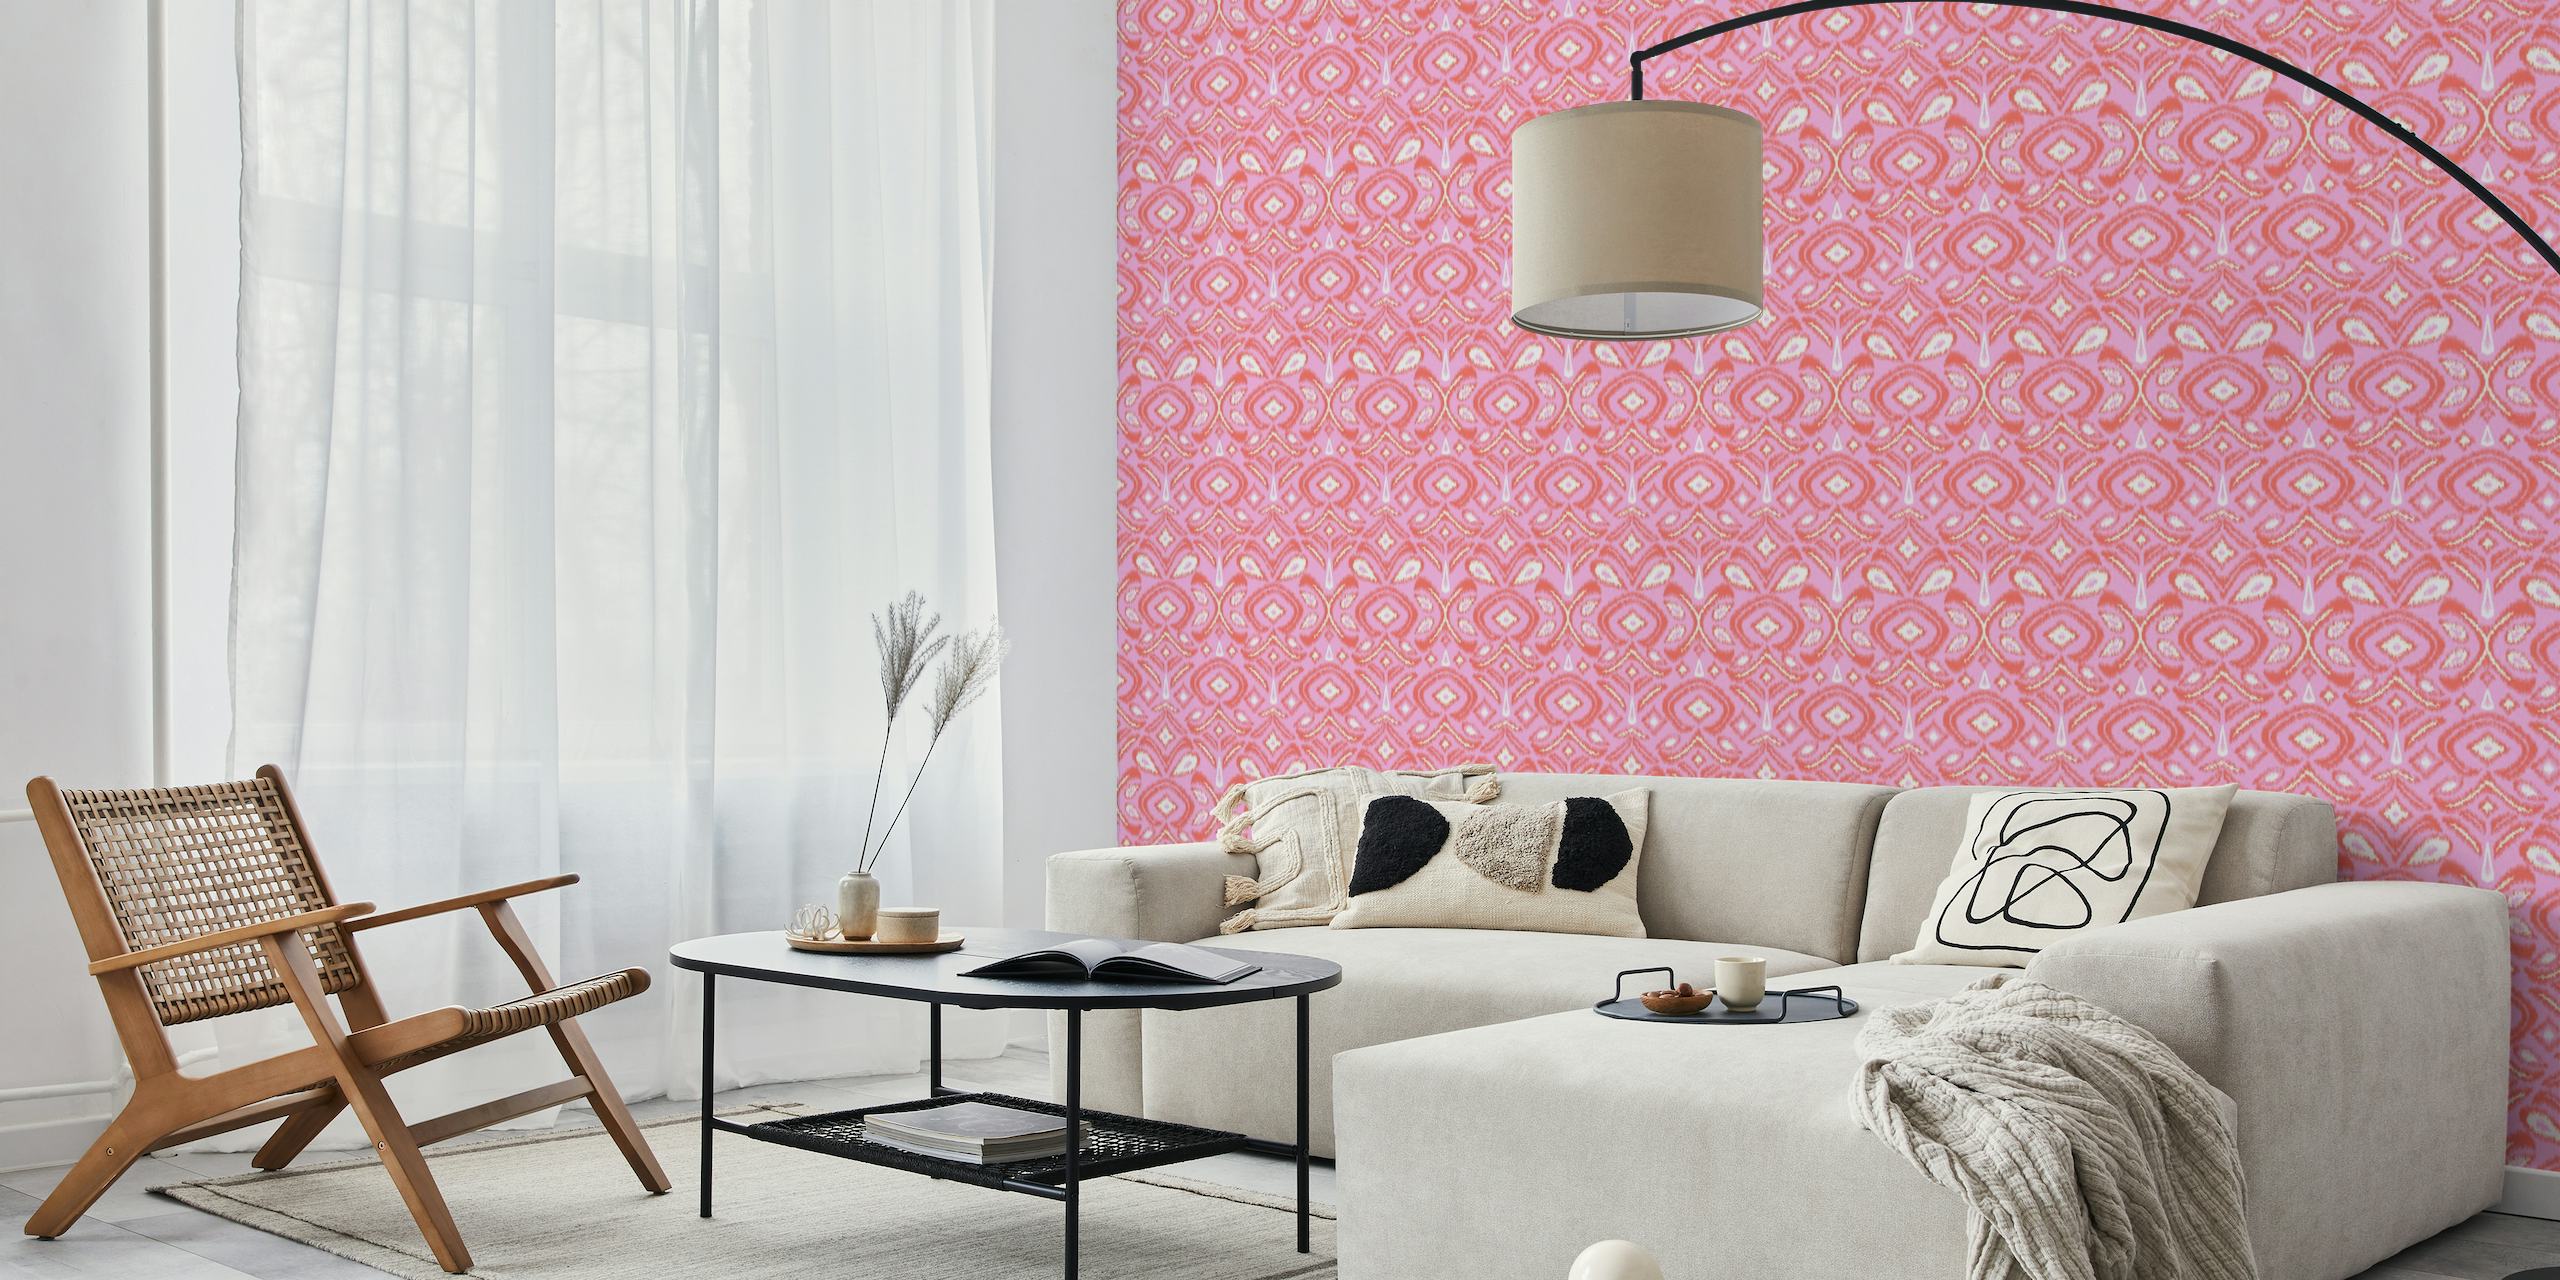 Ikat flower pattern in vibrant pink and coral hues on a wall mural